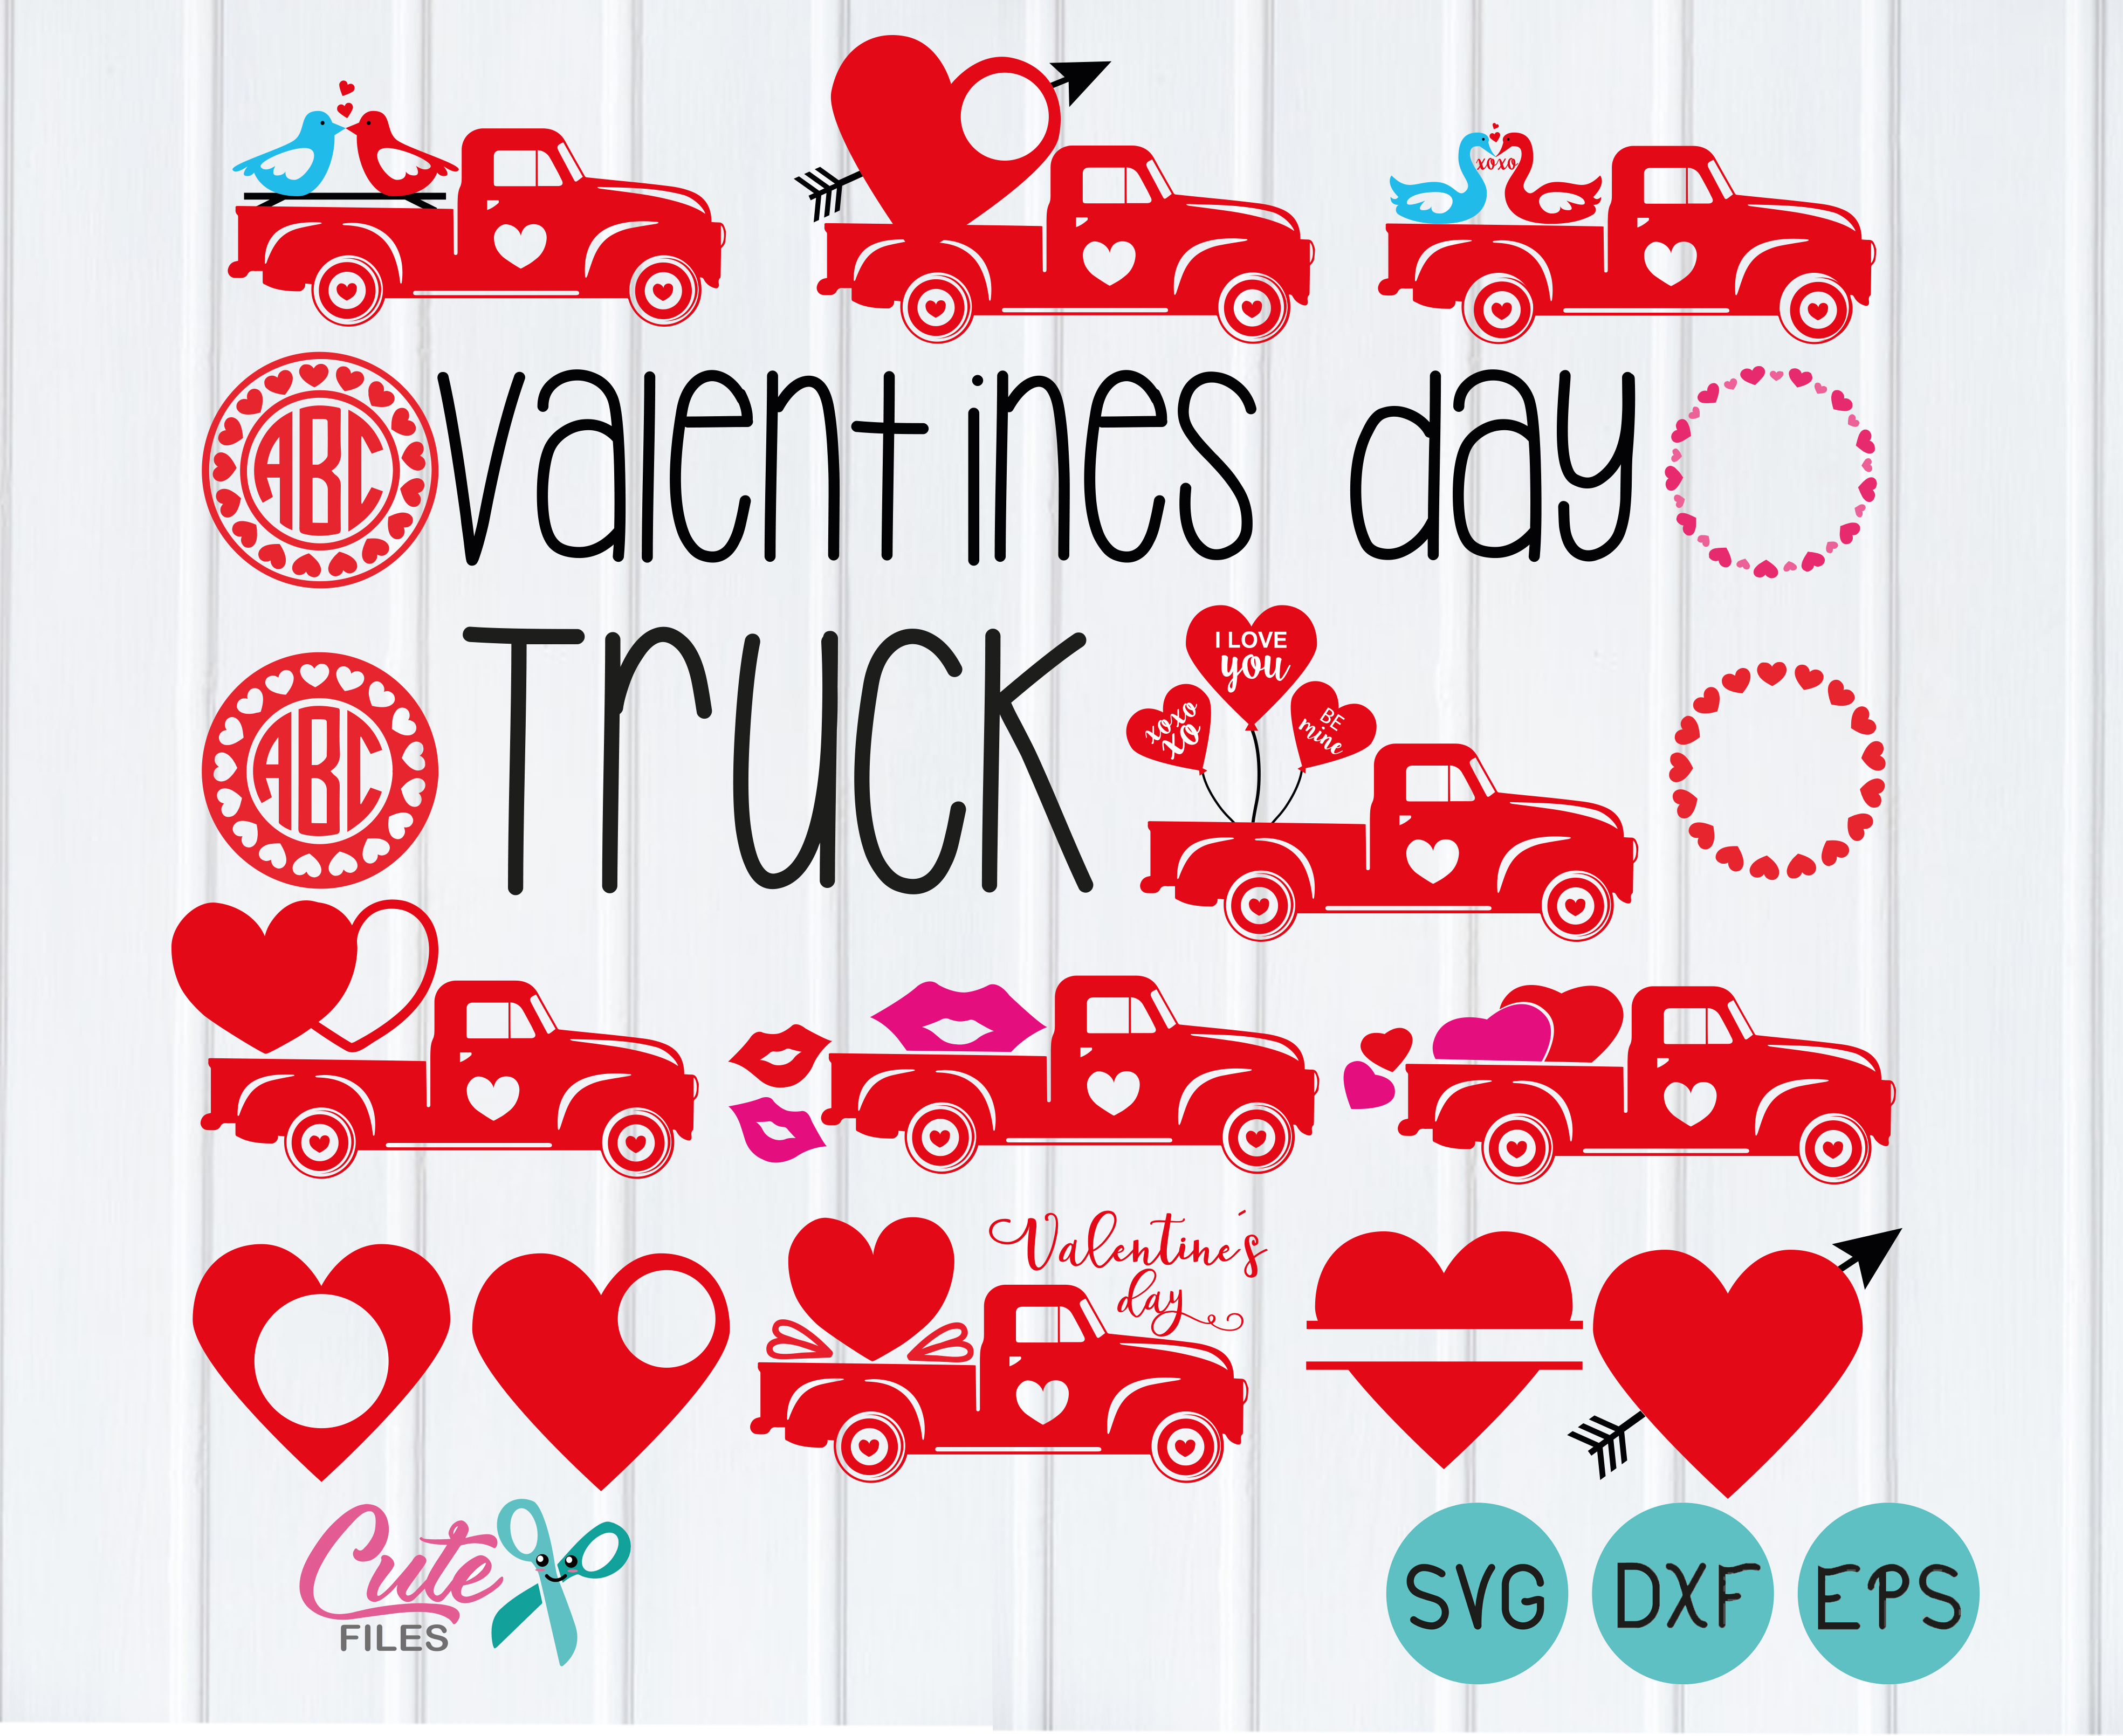 237+ Valentine's Day Card SVG Free - Free Download SVG Cut Files